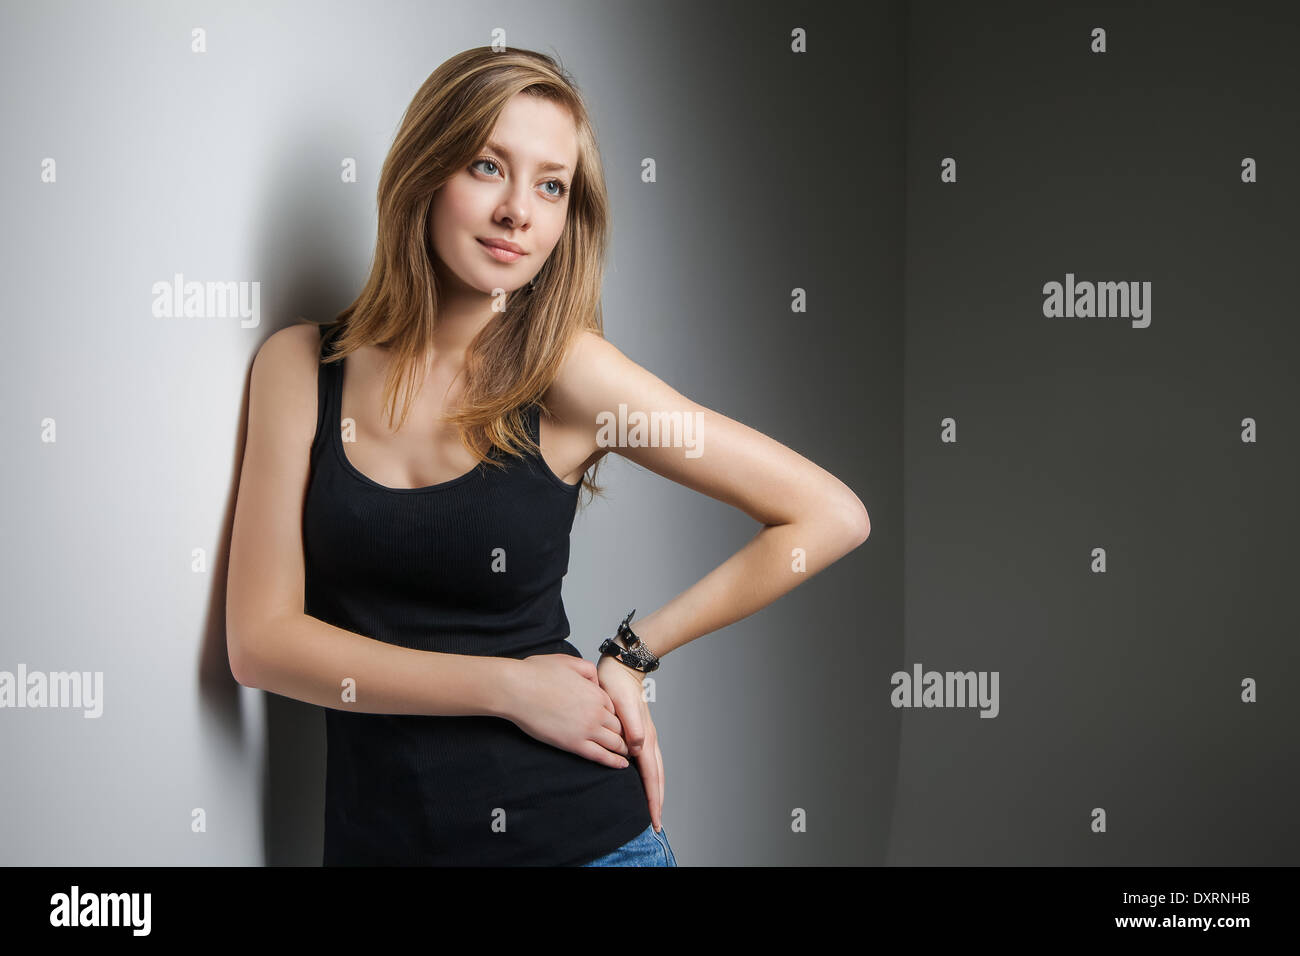 Beautiful young woman wearing jeans and black t-shirt over gray background Stock Photo